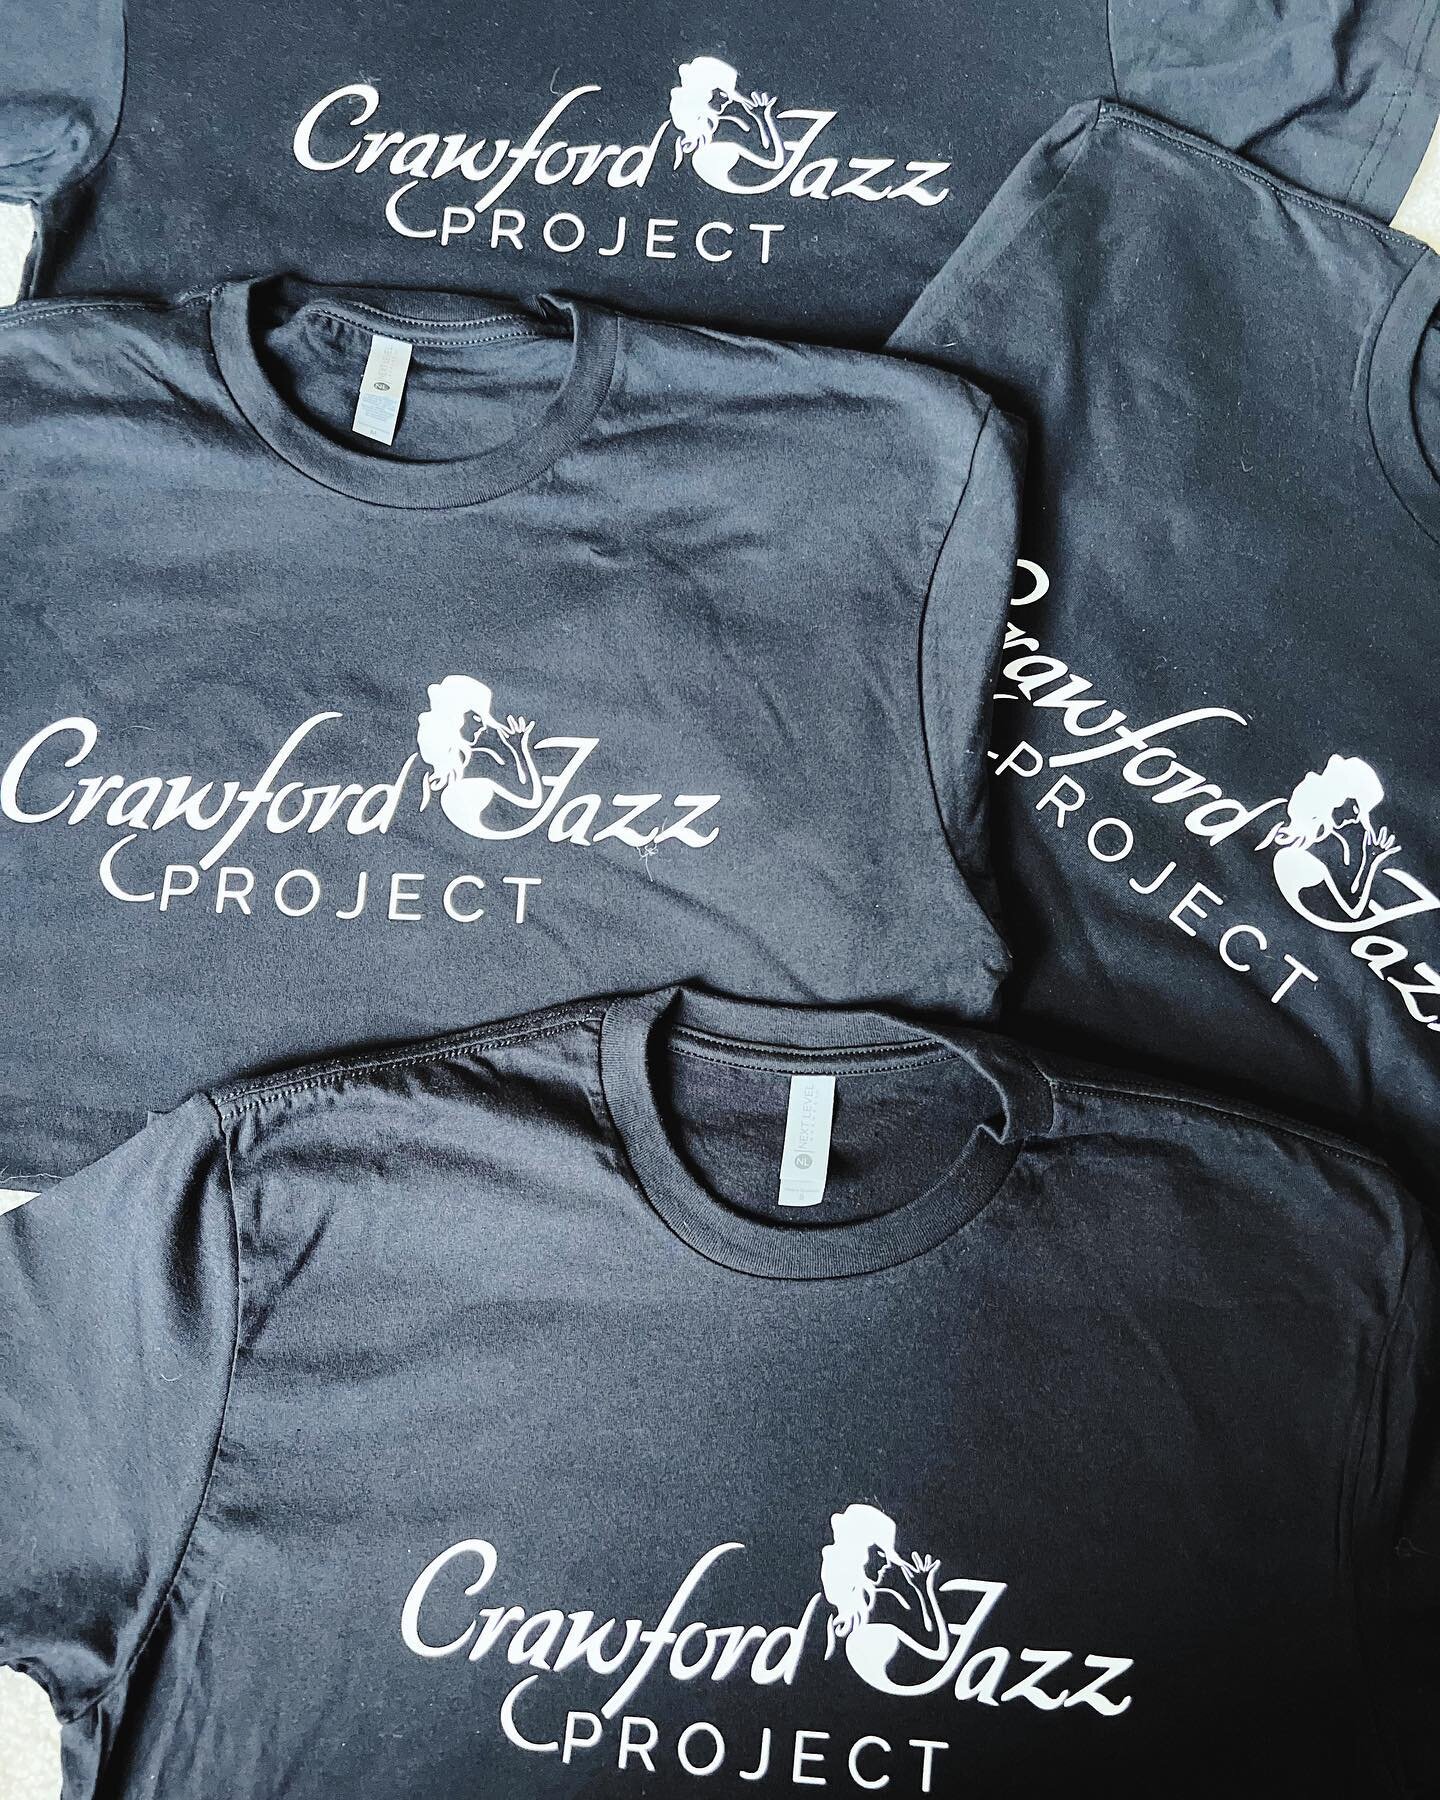 Shirts for the talented dancers of @crawford_jazz_project ! Make sure to check out their next show in July!

#cjp #crawfordjazzproject #customtees #customtshirts #smallbusiness #supportsmallbusiness #shoplocal #orlandoflorida #orlandobusiness